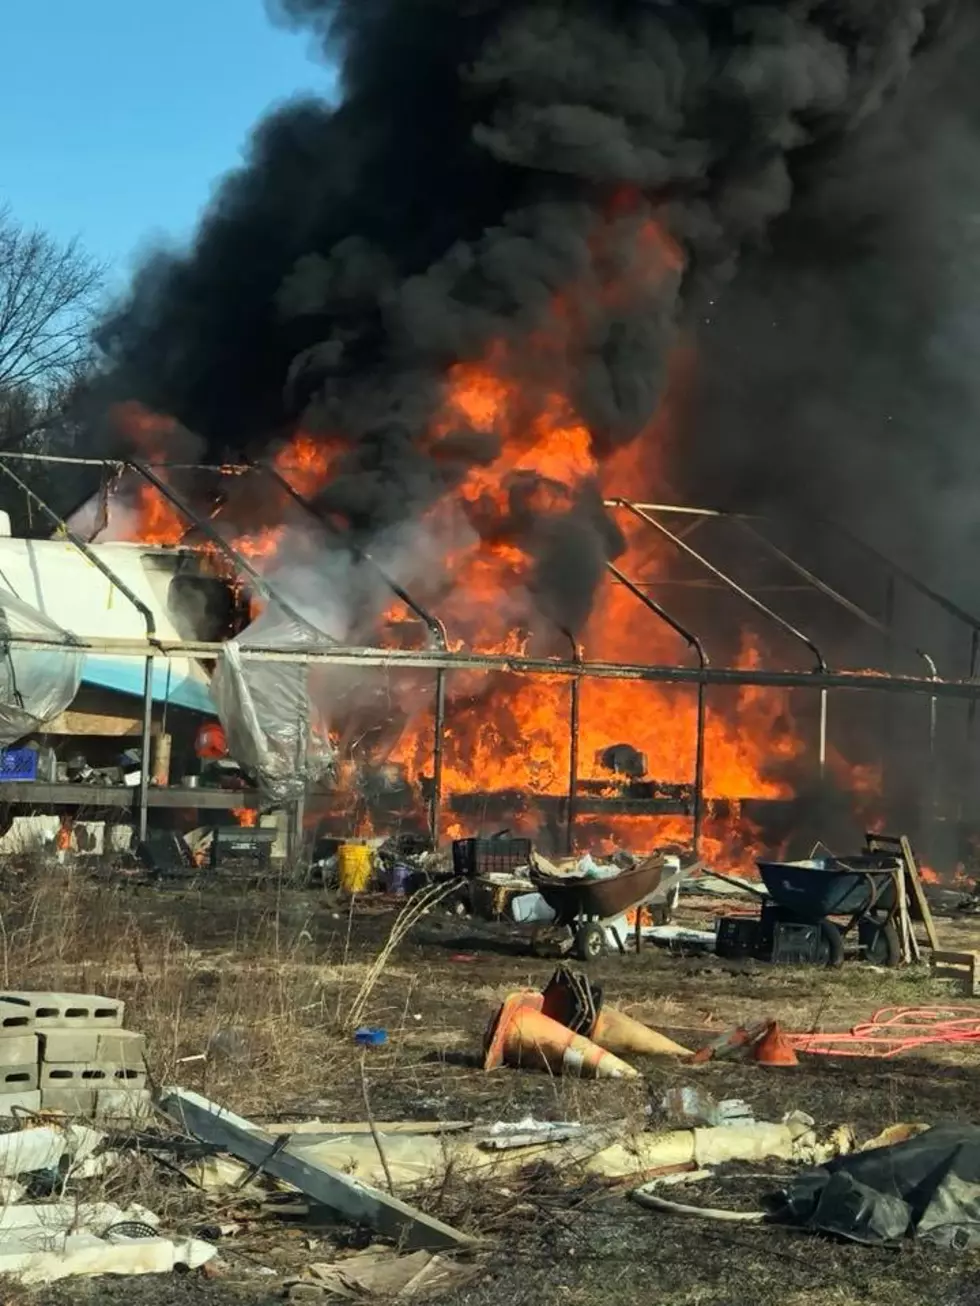 Greenhouse becomes ablaze Sunday morning in Howell